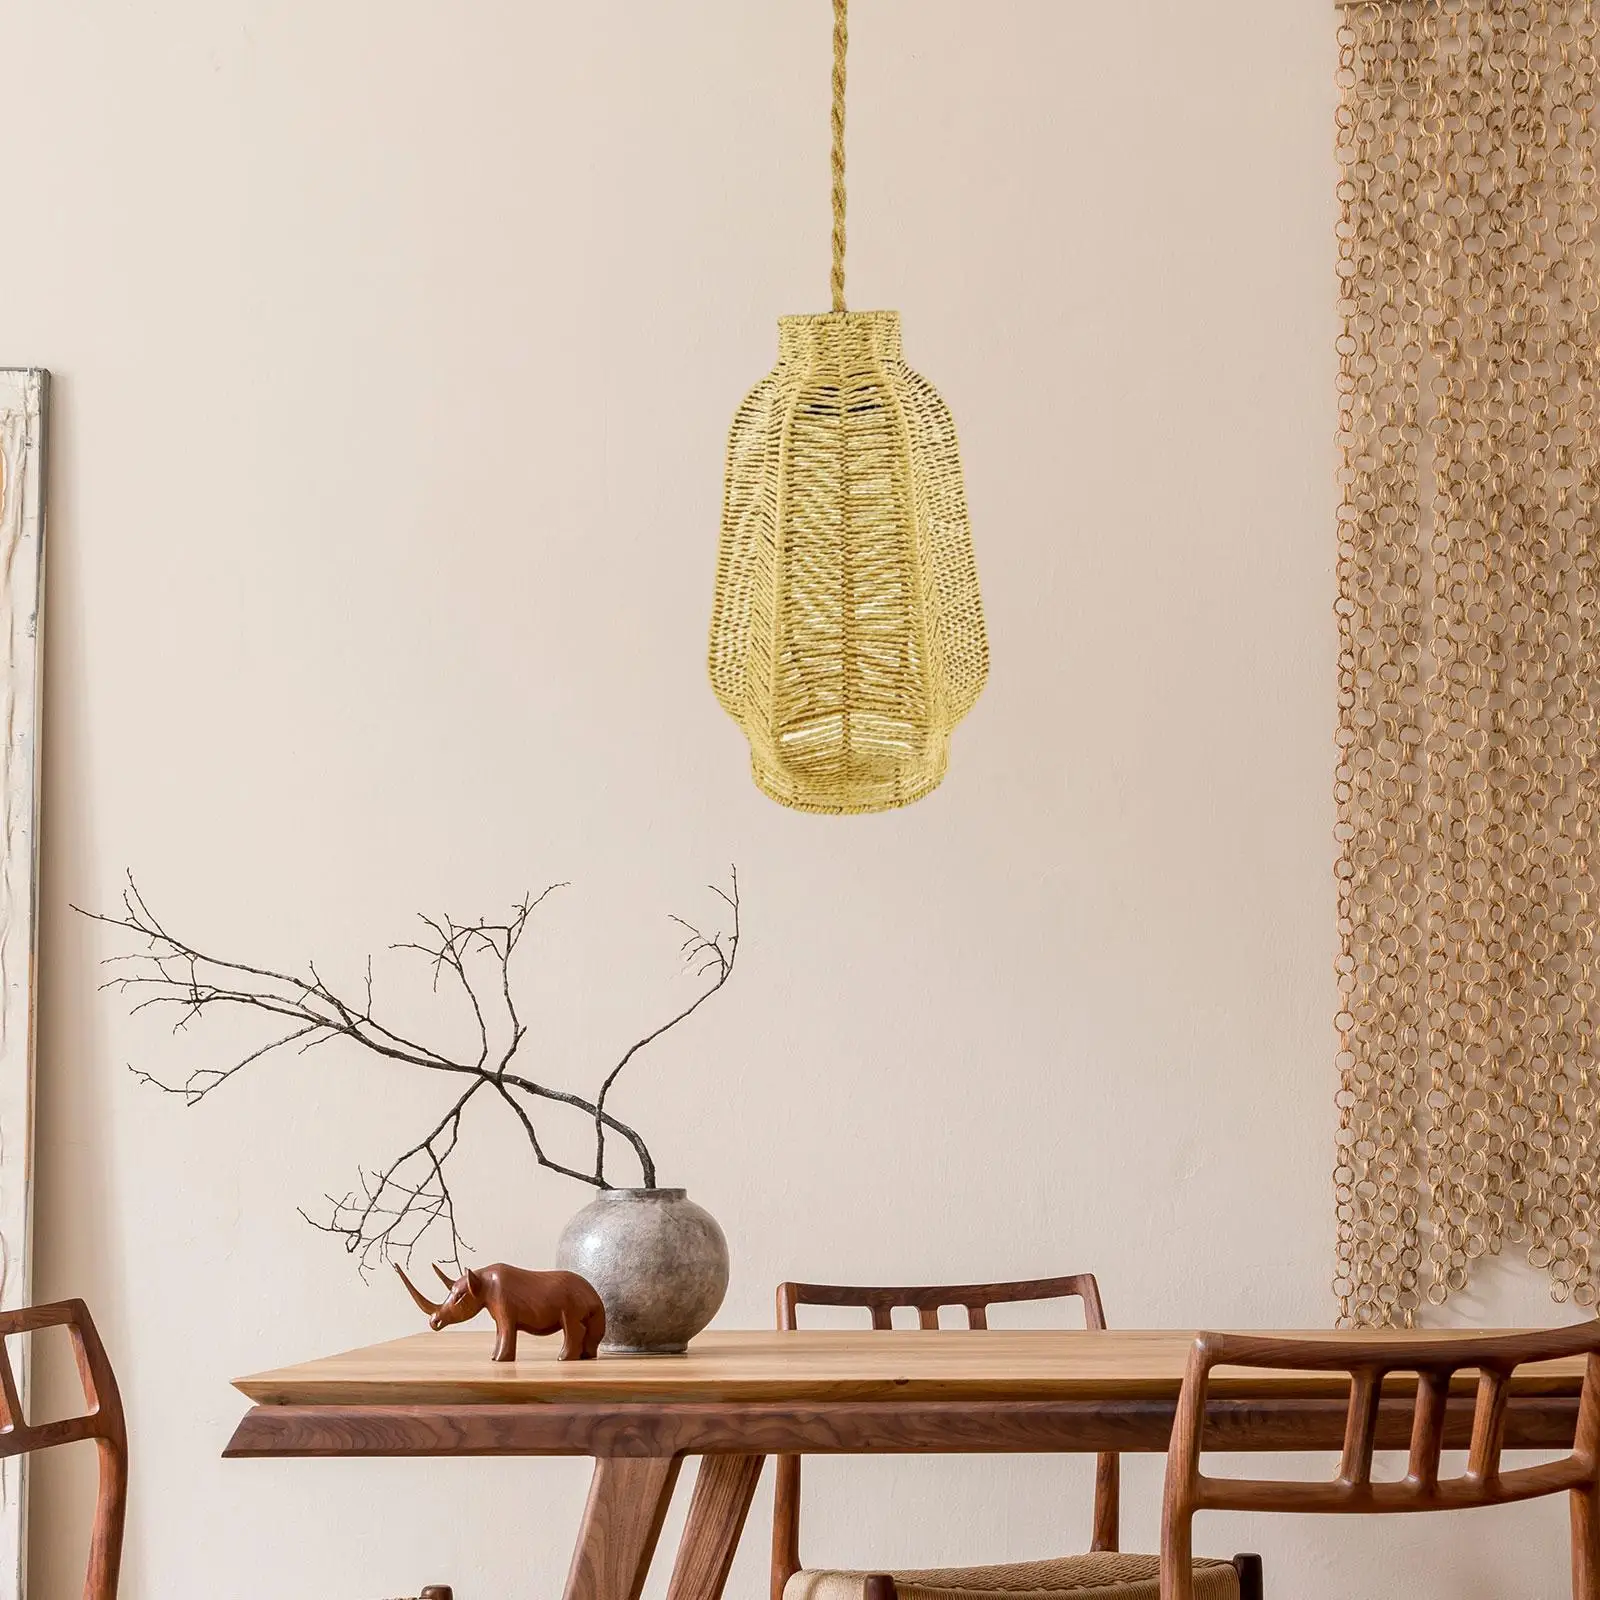 Pendant Lamp Shade Chandelier Shade Rustic Light Fixture Shade Boho Lampshade for Cafe Teahouse Dining Room Outdoor Decor